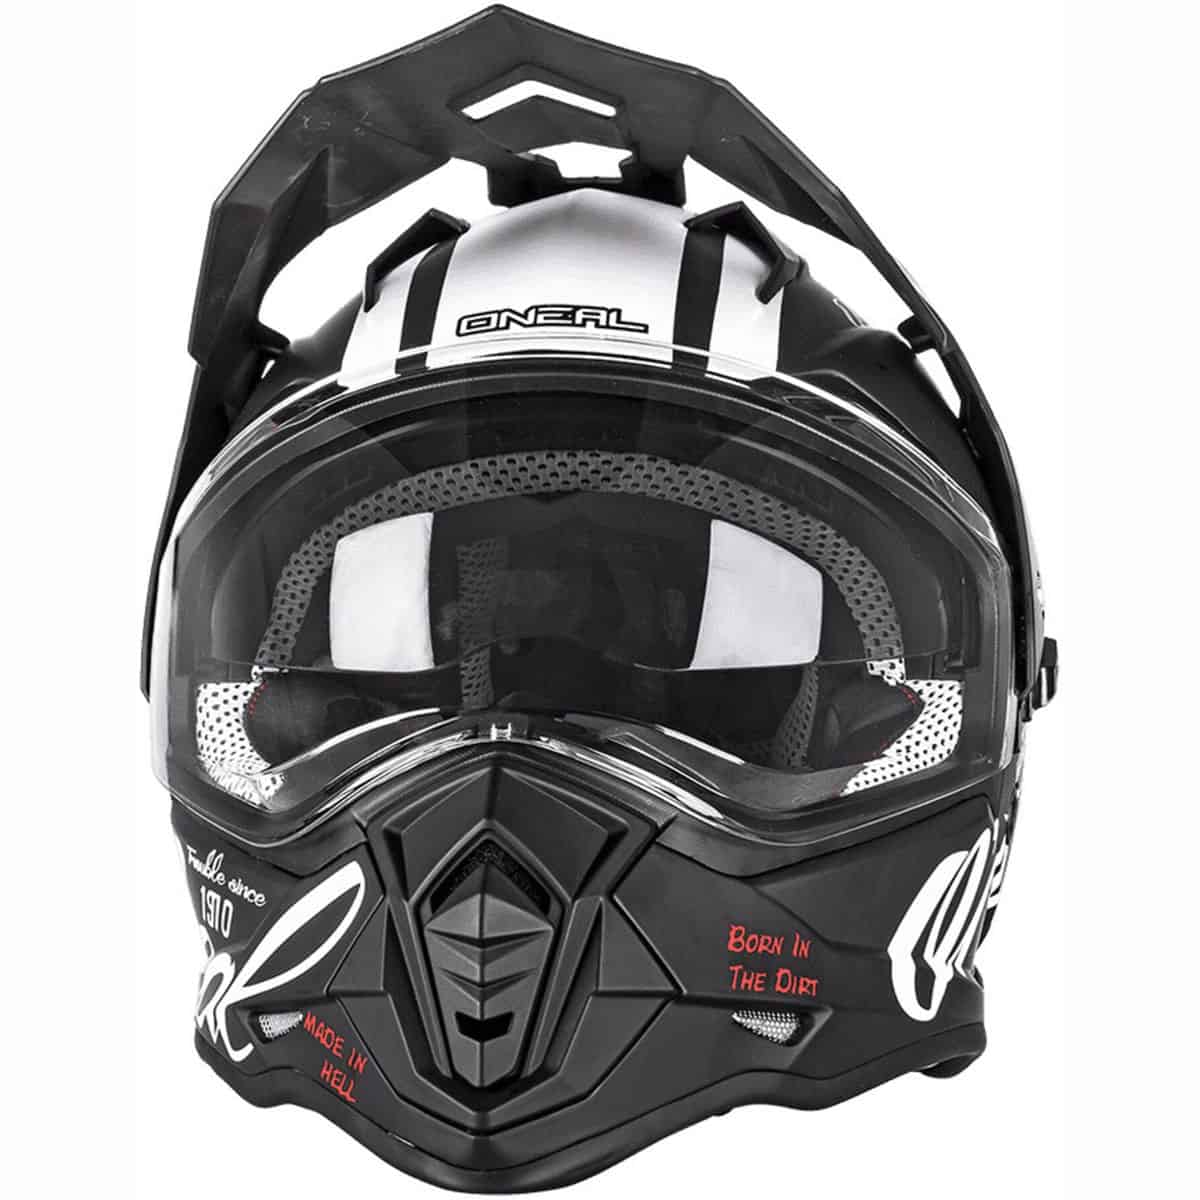 ONeal Sierra Adventure & Trail Helmet: "A great alternative to much more expensive options 3